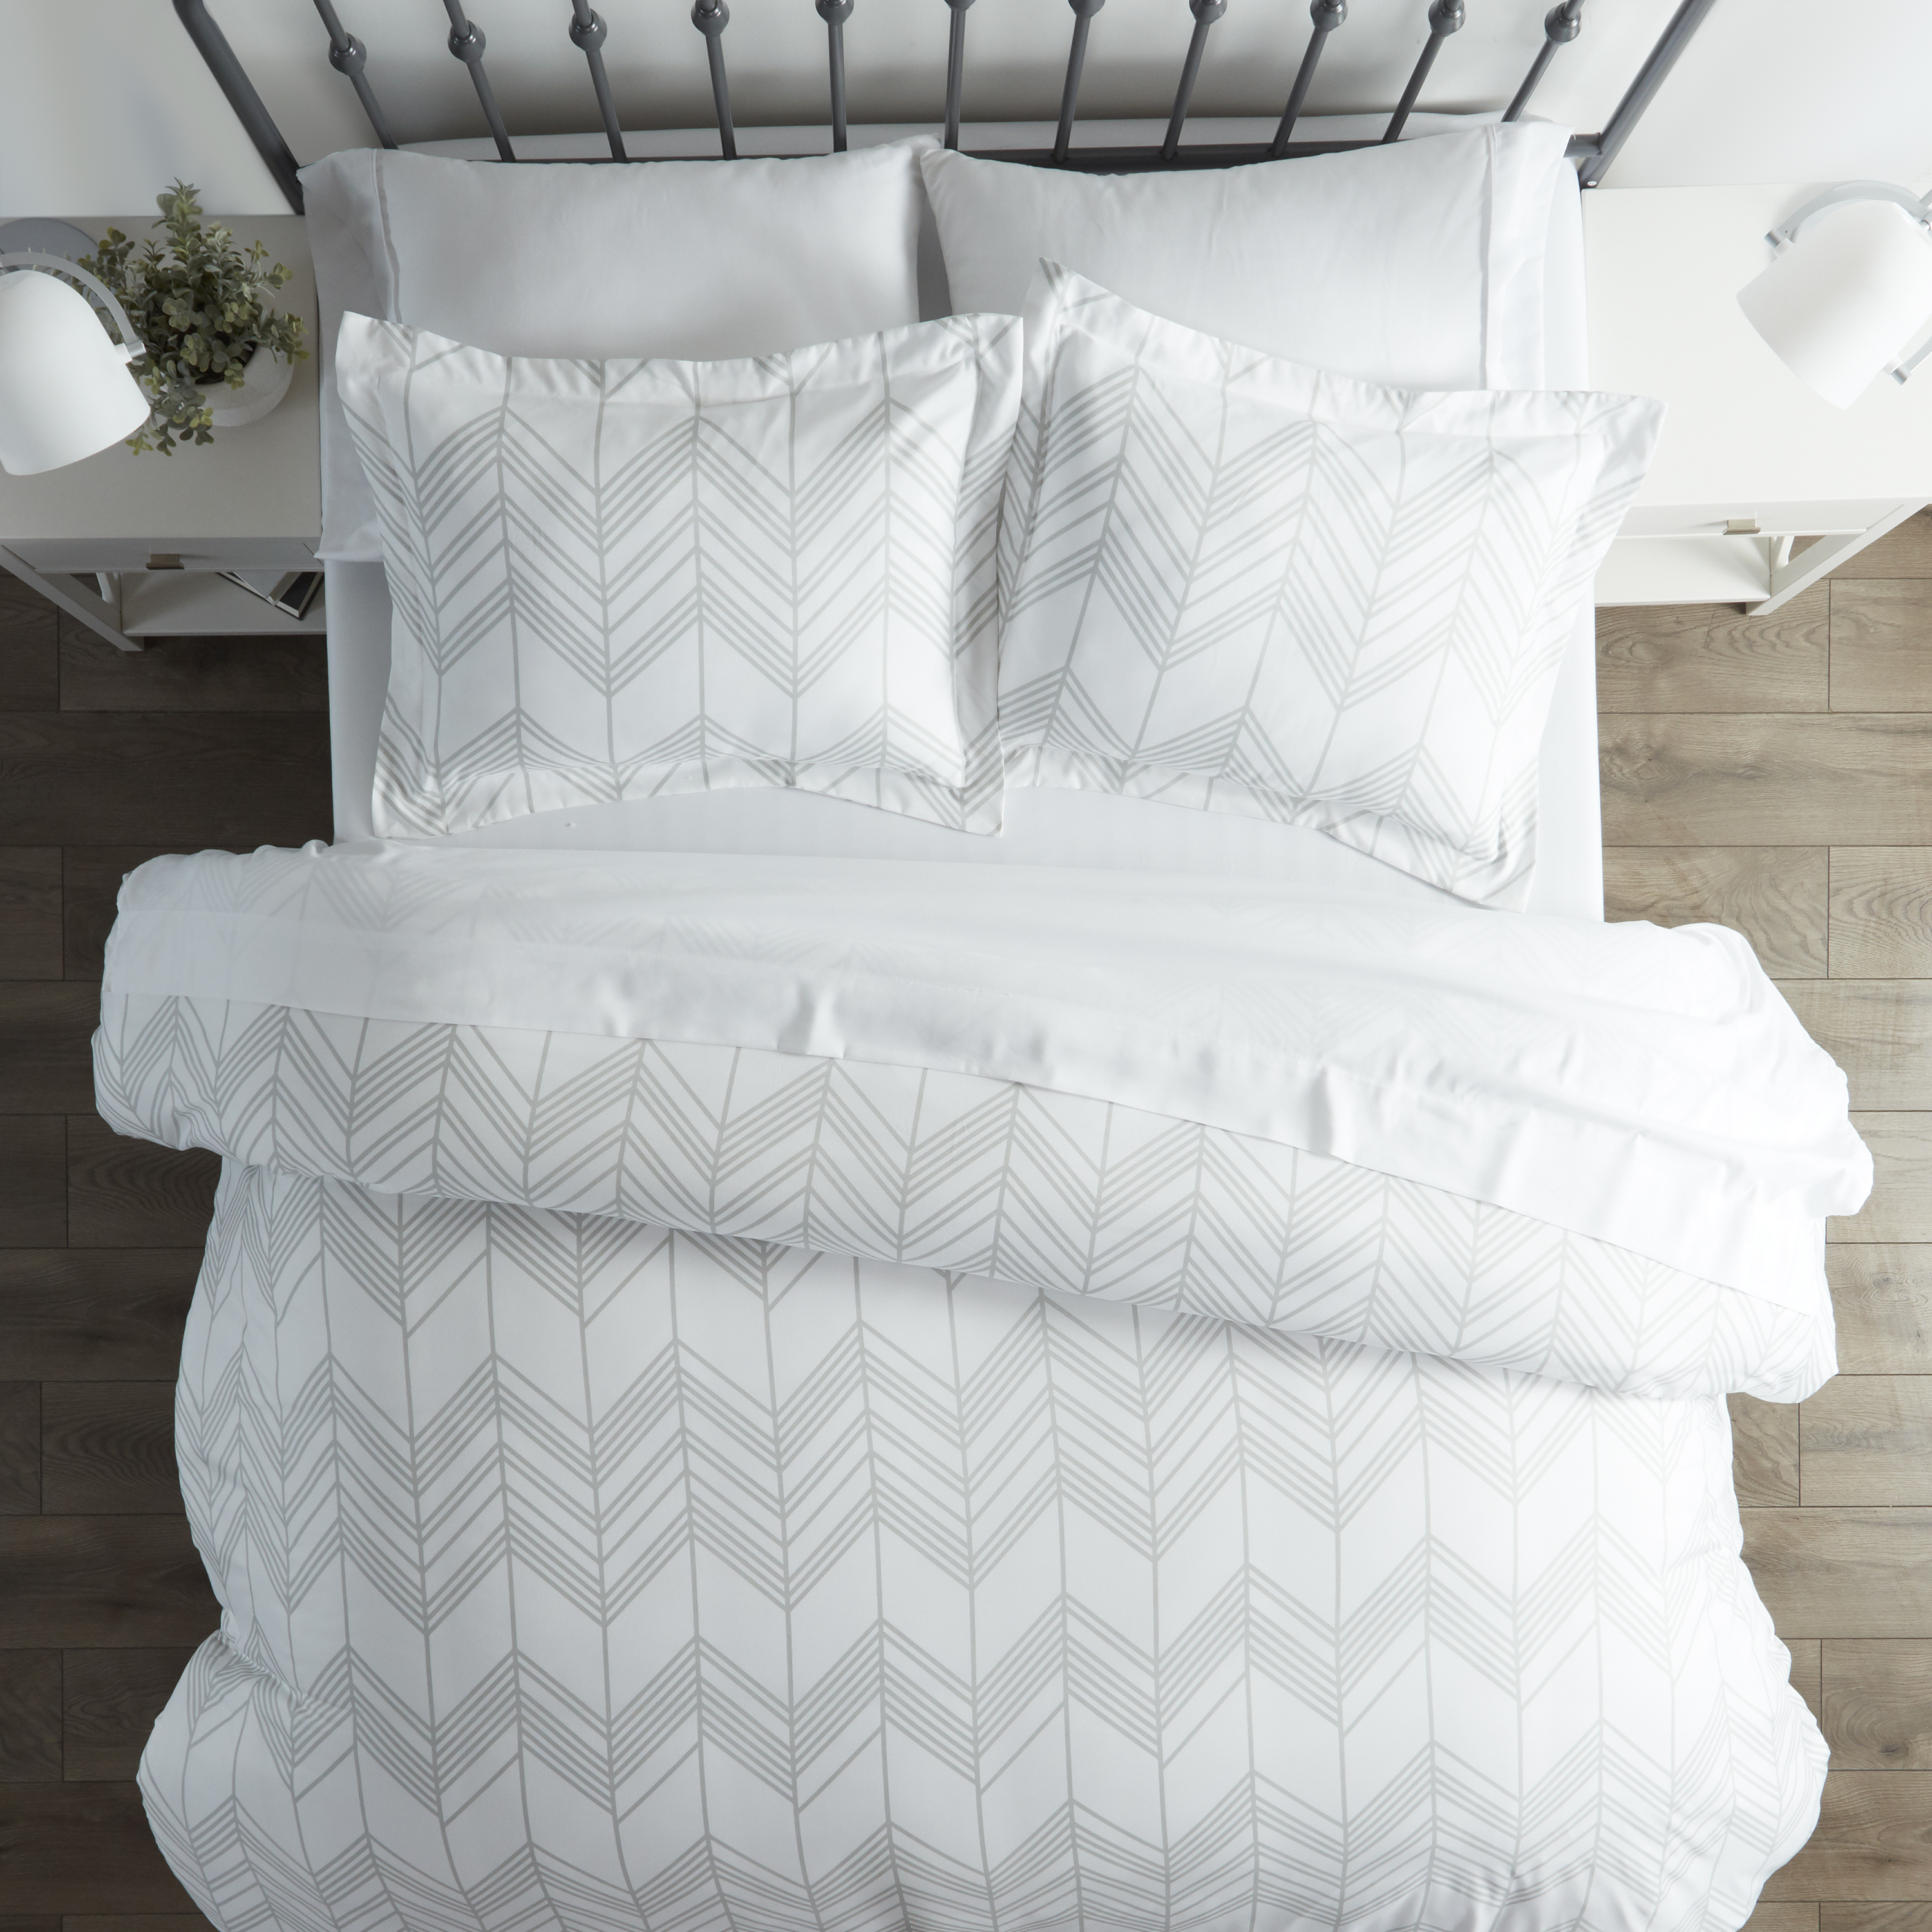 Linens & Hutch Alps Chevron Patterned Duvet Cover + 2 Matching Shams: Starting at $20.00 + Free Shipping!